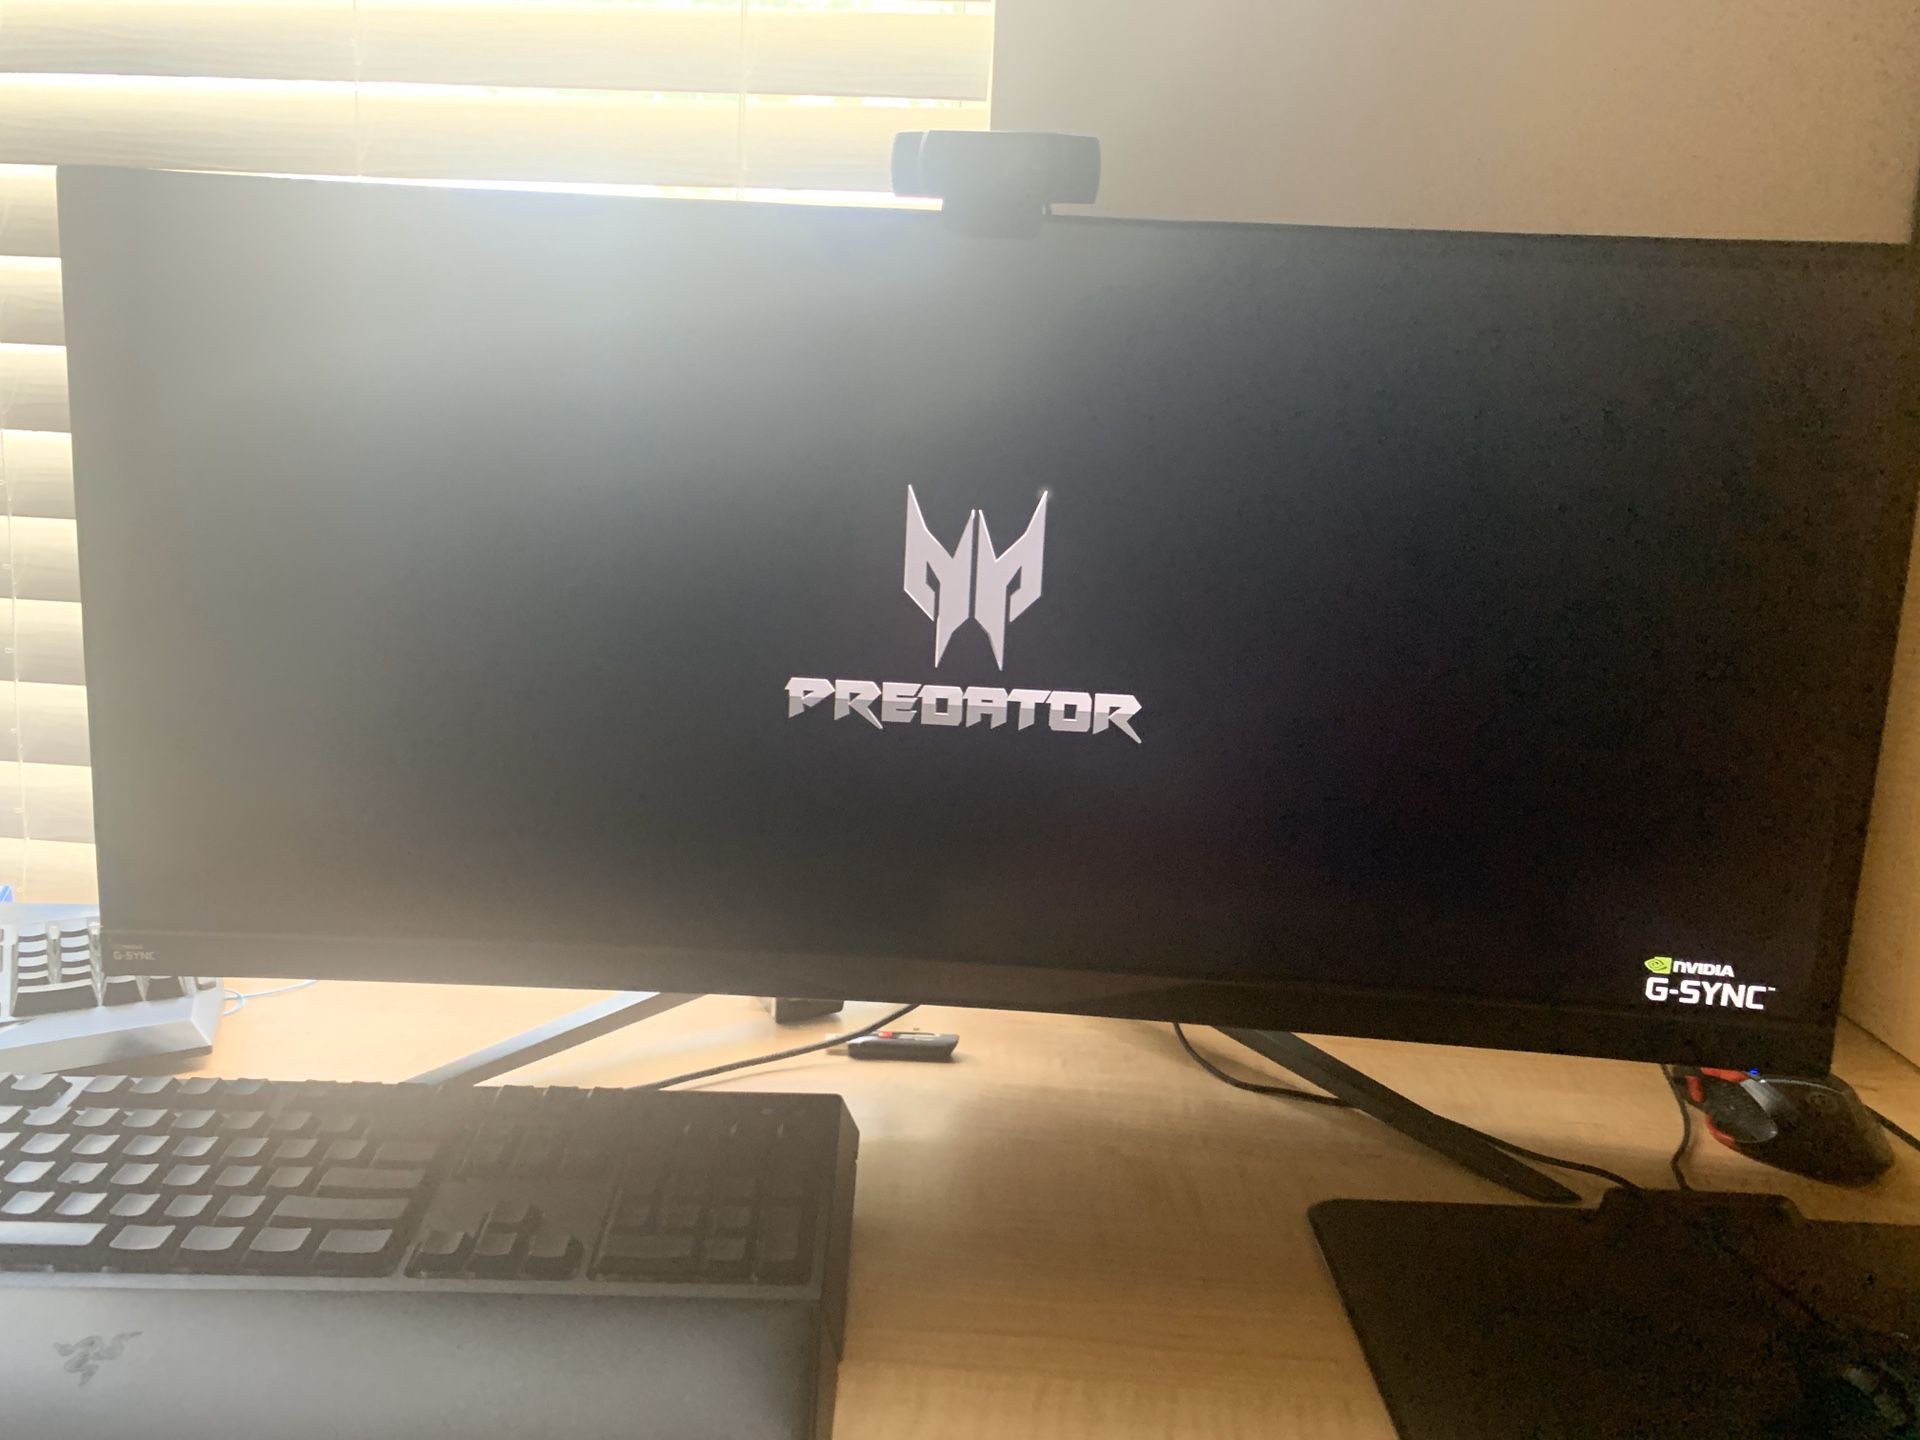 Acer Predator Gaming X34 Pbmiphzx Curved 34" UltraWide QHD Monitor with NVIDIA G-SYNC